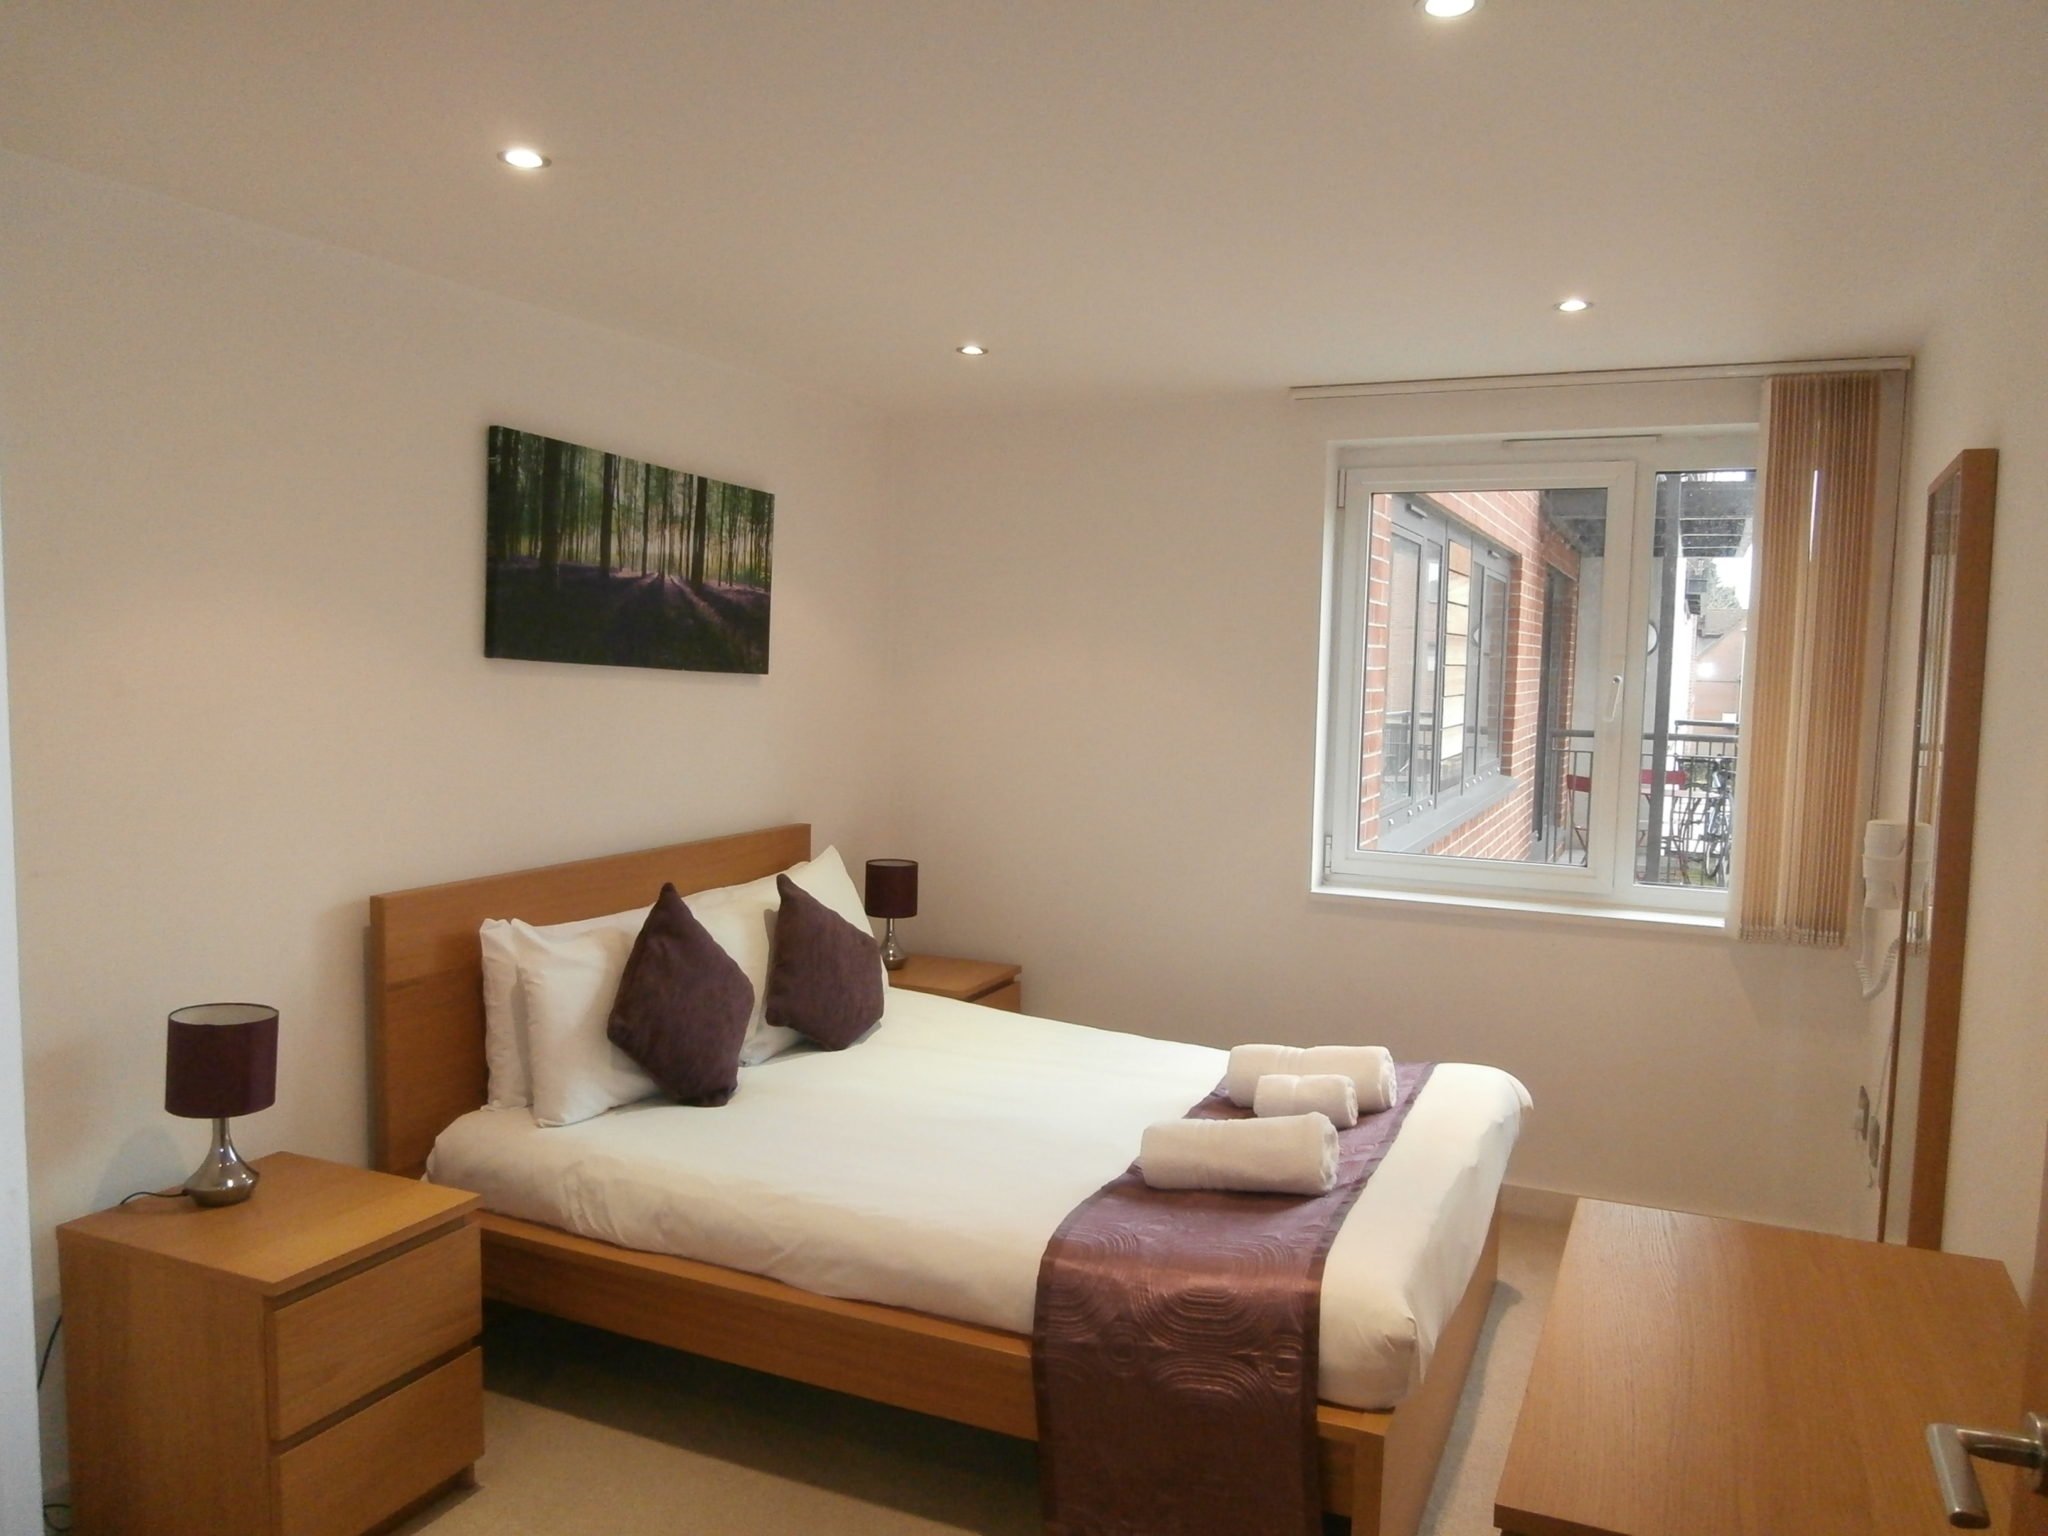 Camberley-Corporate-Accommodation-Surrey-|-Self-catering-Apartments-Camberley-UK-|-Group-Accommodation-Surrey-|-Short-Lets-Camberley-|-LOW-RATES---BOOK-NOW---Urban-Stay